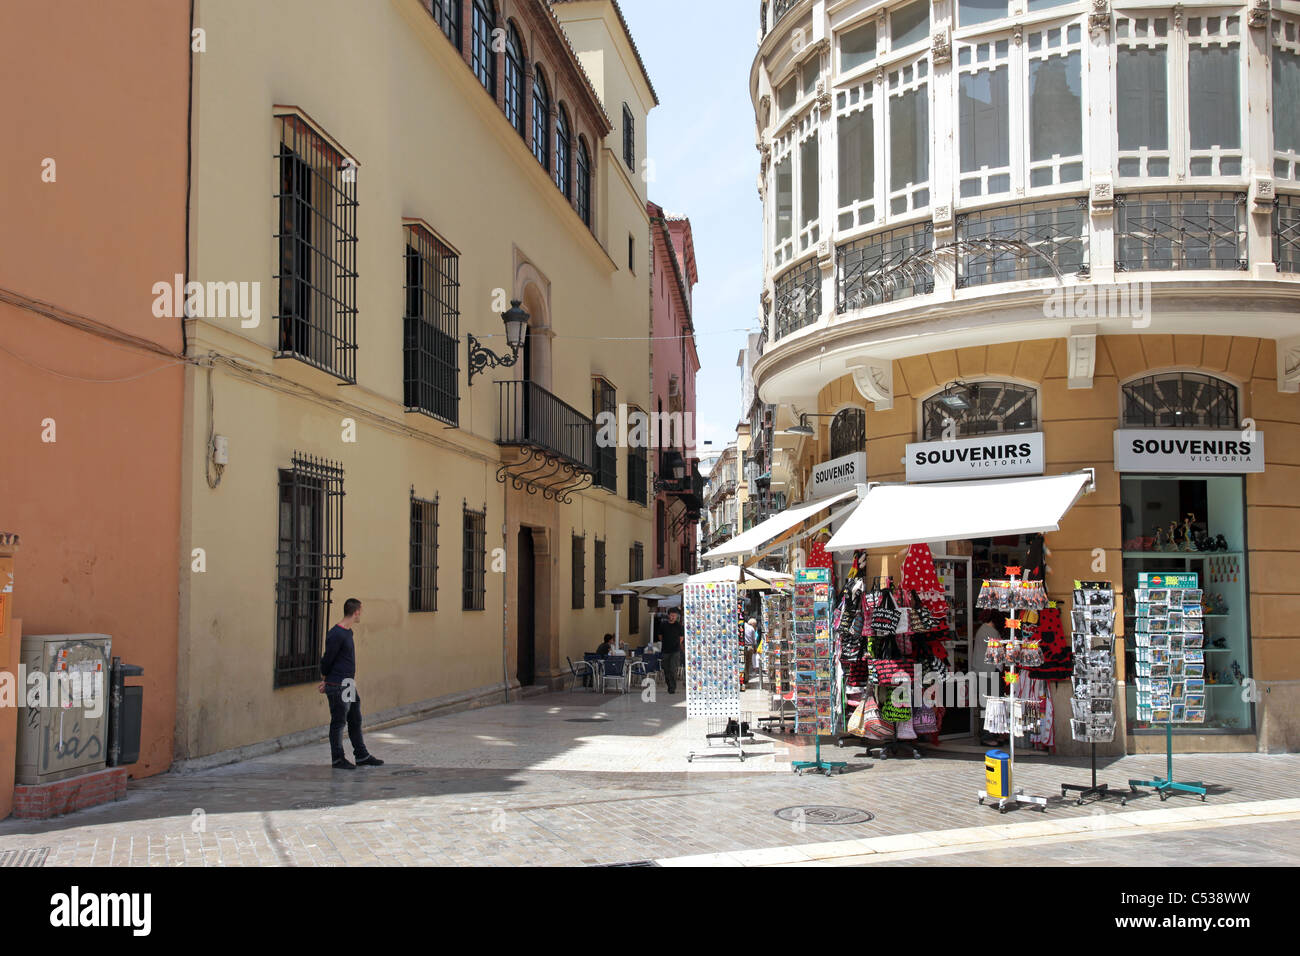 Malaga Spain narrow pedestrian street between houses, apartments and businesses. Souvenir signs on corner. Stock Photo